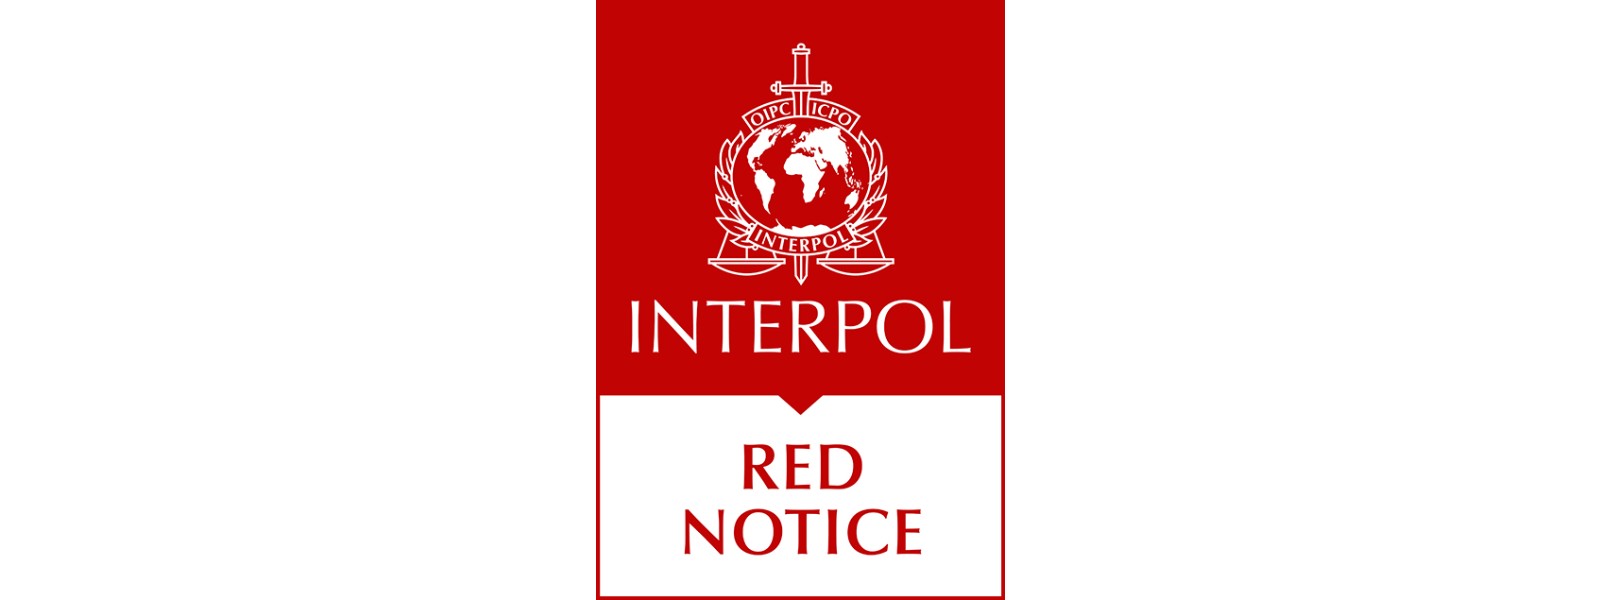 INTERPOL RED NOTICE issued against 129 Sri Lankans